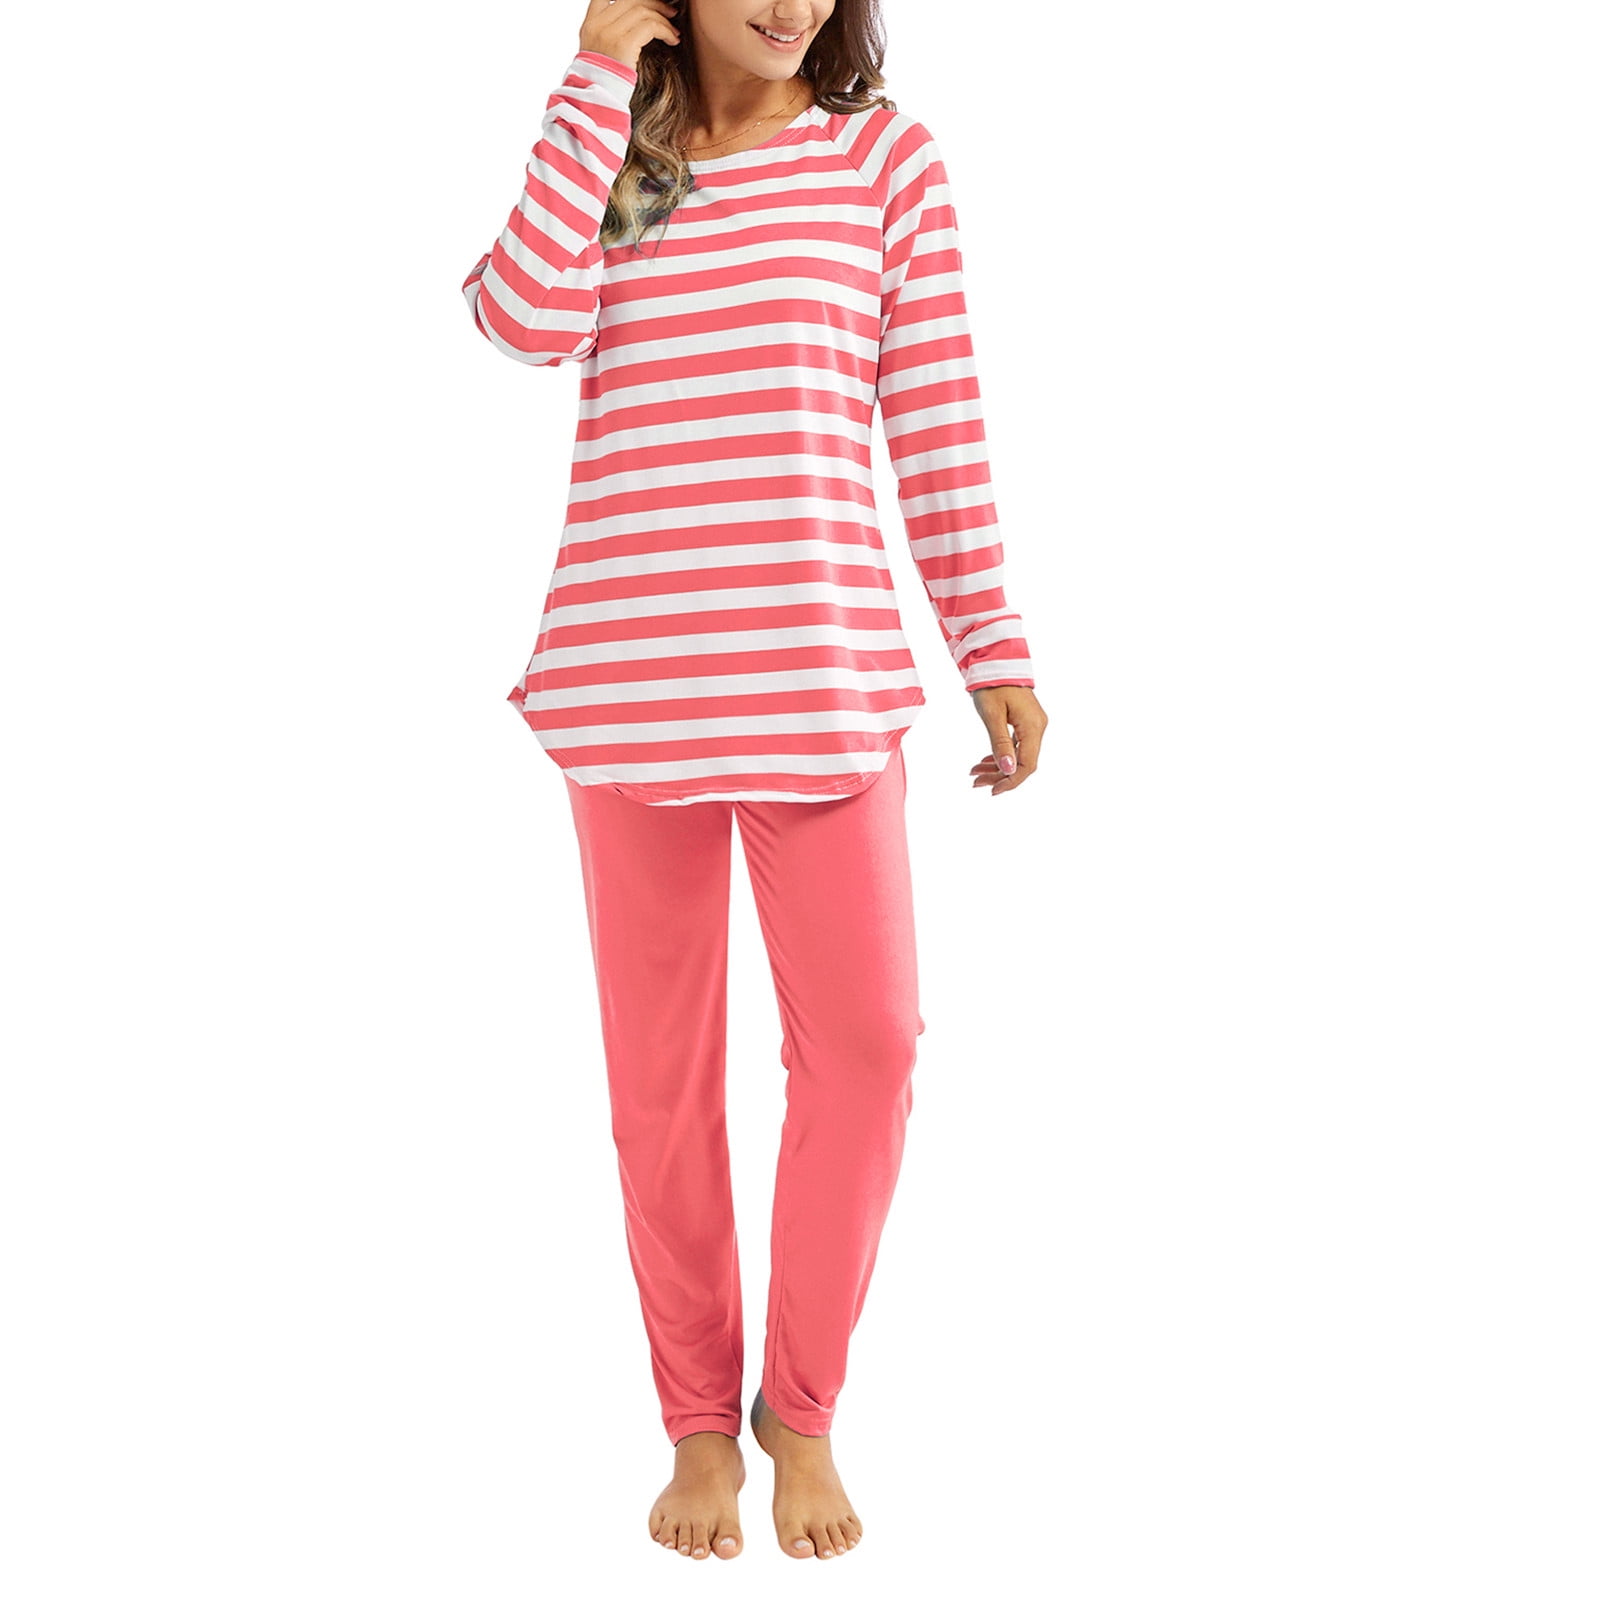 Women's Two-piece Suit Striped Pajamas Set Long Sleeve Tops and Pants ...